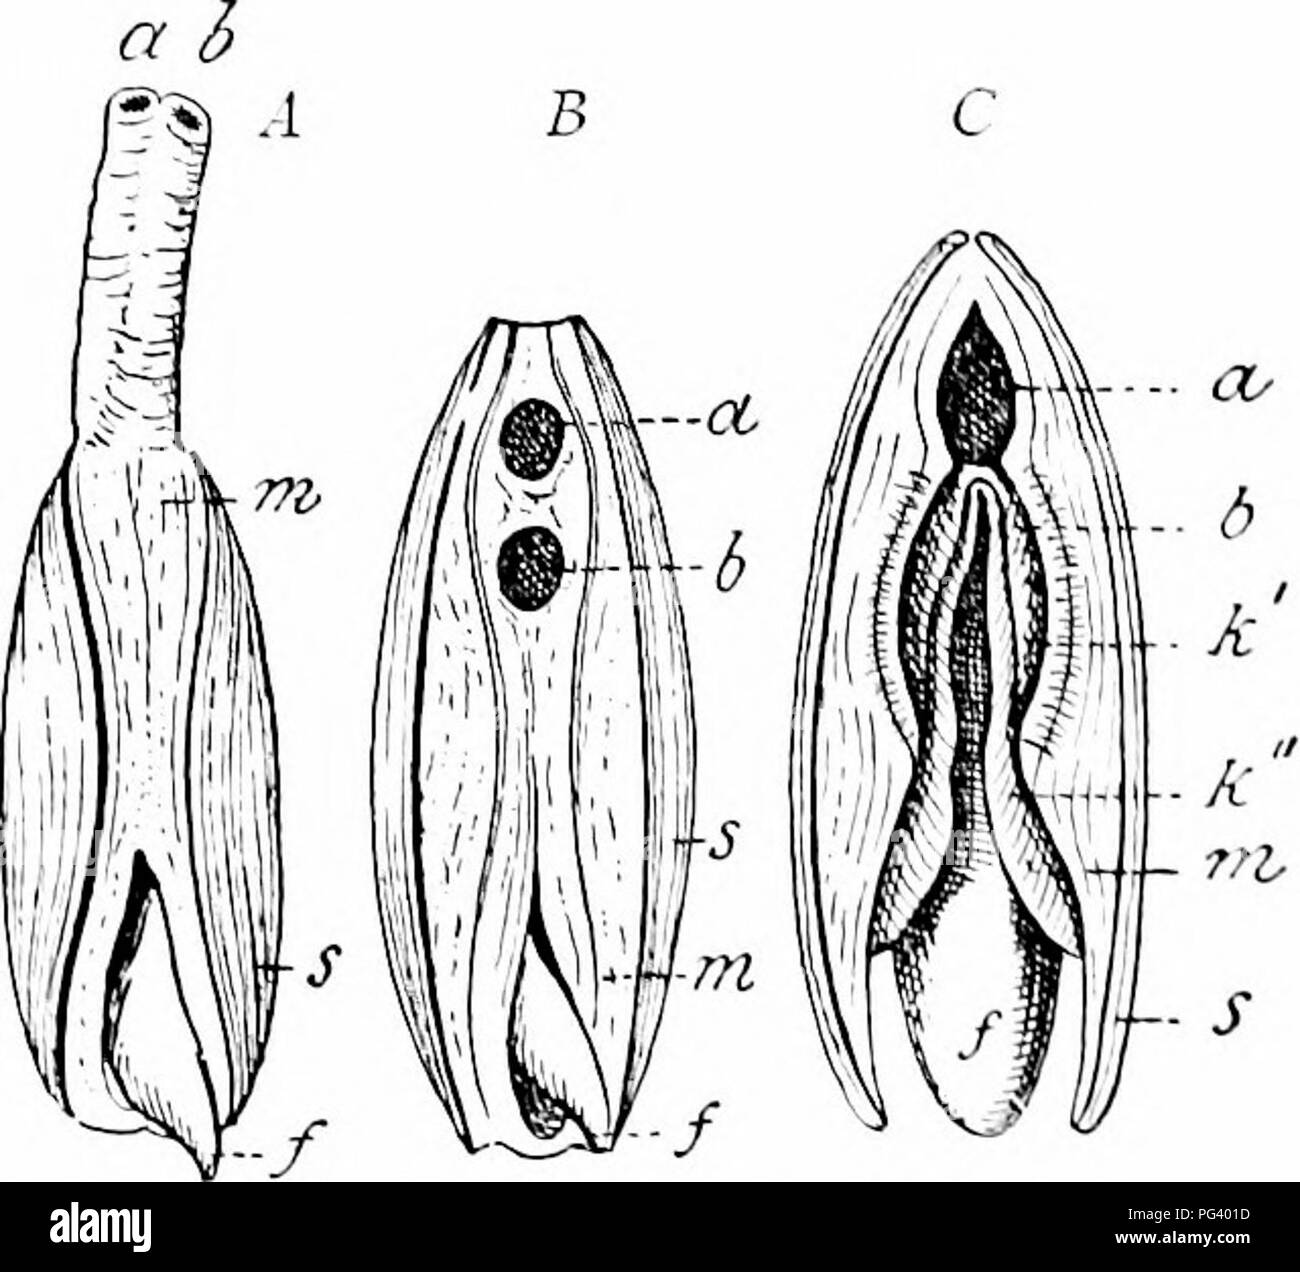 . A manual of zoology. Zoology. us MOLLUSCA arc o]icneil hv an clastic hinge ligaDioit usually placed dorsal to and be- hind ihc l&quot;LiuL,'c. The shell is closed Ijy addiiitor iiiiisclfs which extend through the IkhIv from shell to shell, lea-inL^ their impressions on the inner surface (I'ig. 310). Usually there occur an anterior and a posterior adductor ciiually well developed (Ditnyaria); less frei|ueinly the anterior is rudimentary (Heteromyaria) or entirel)' disappears (Monomyaria). ^^'hen the muscles are relaxed the elastic ligament opens the 'al-es. The Inirroiloiil hinge is the ty Stock Photo